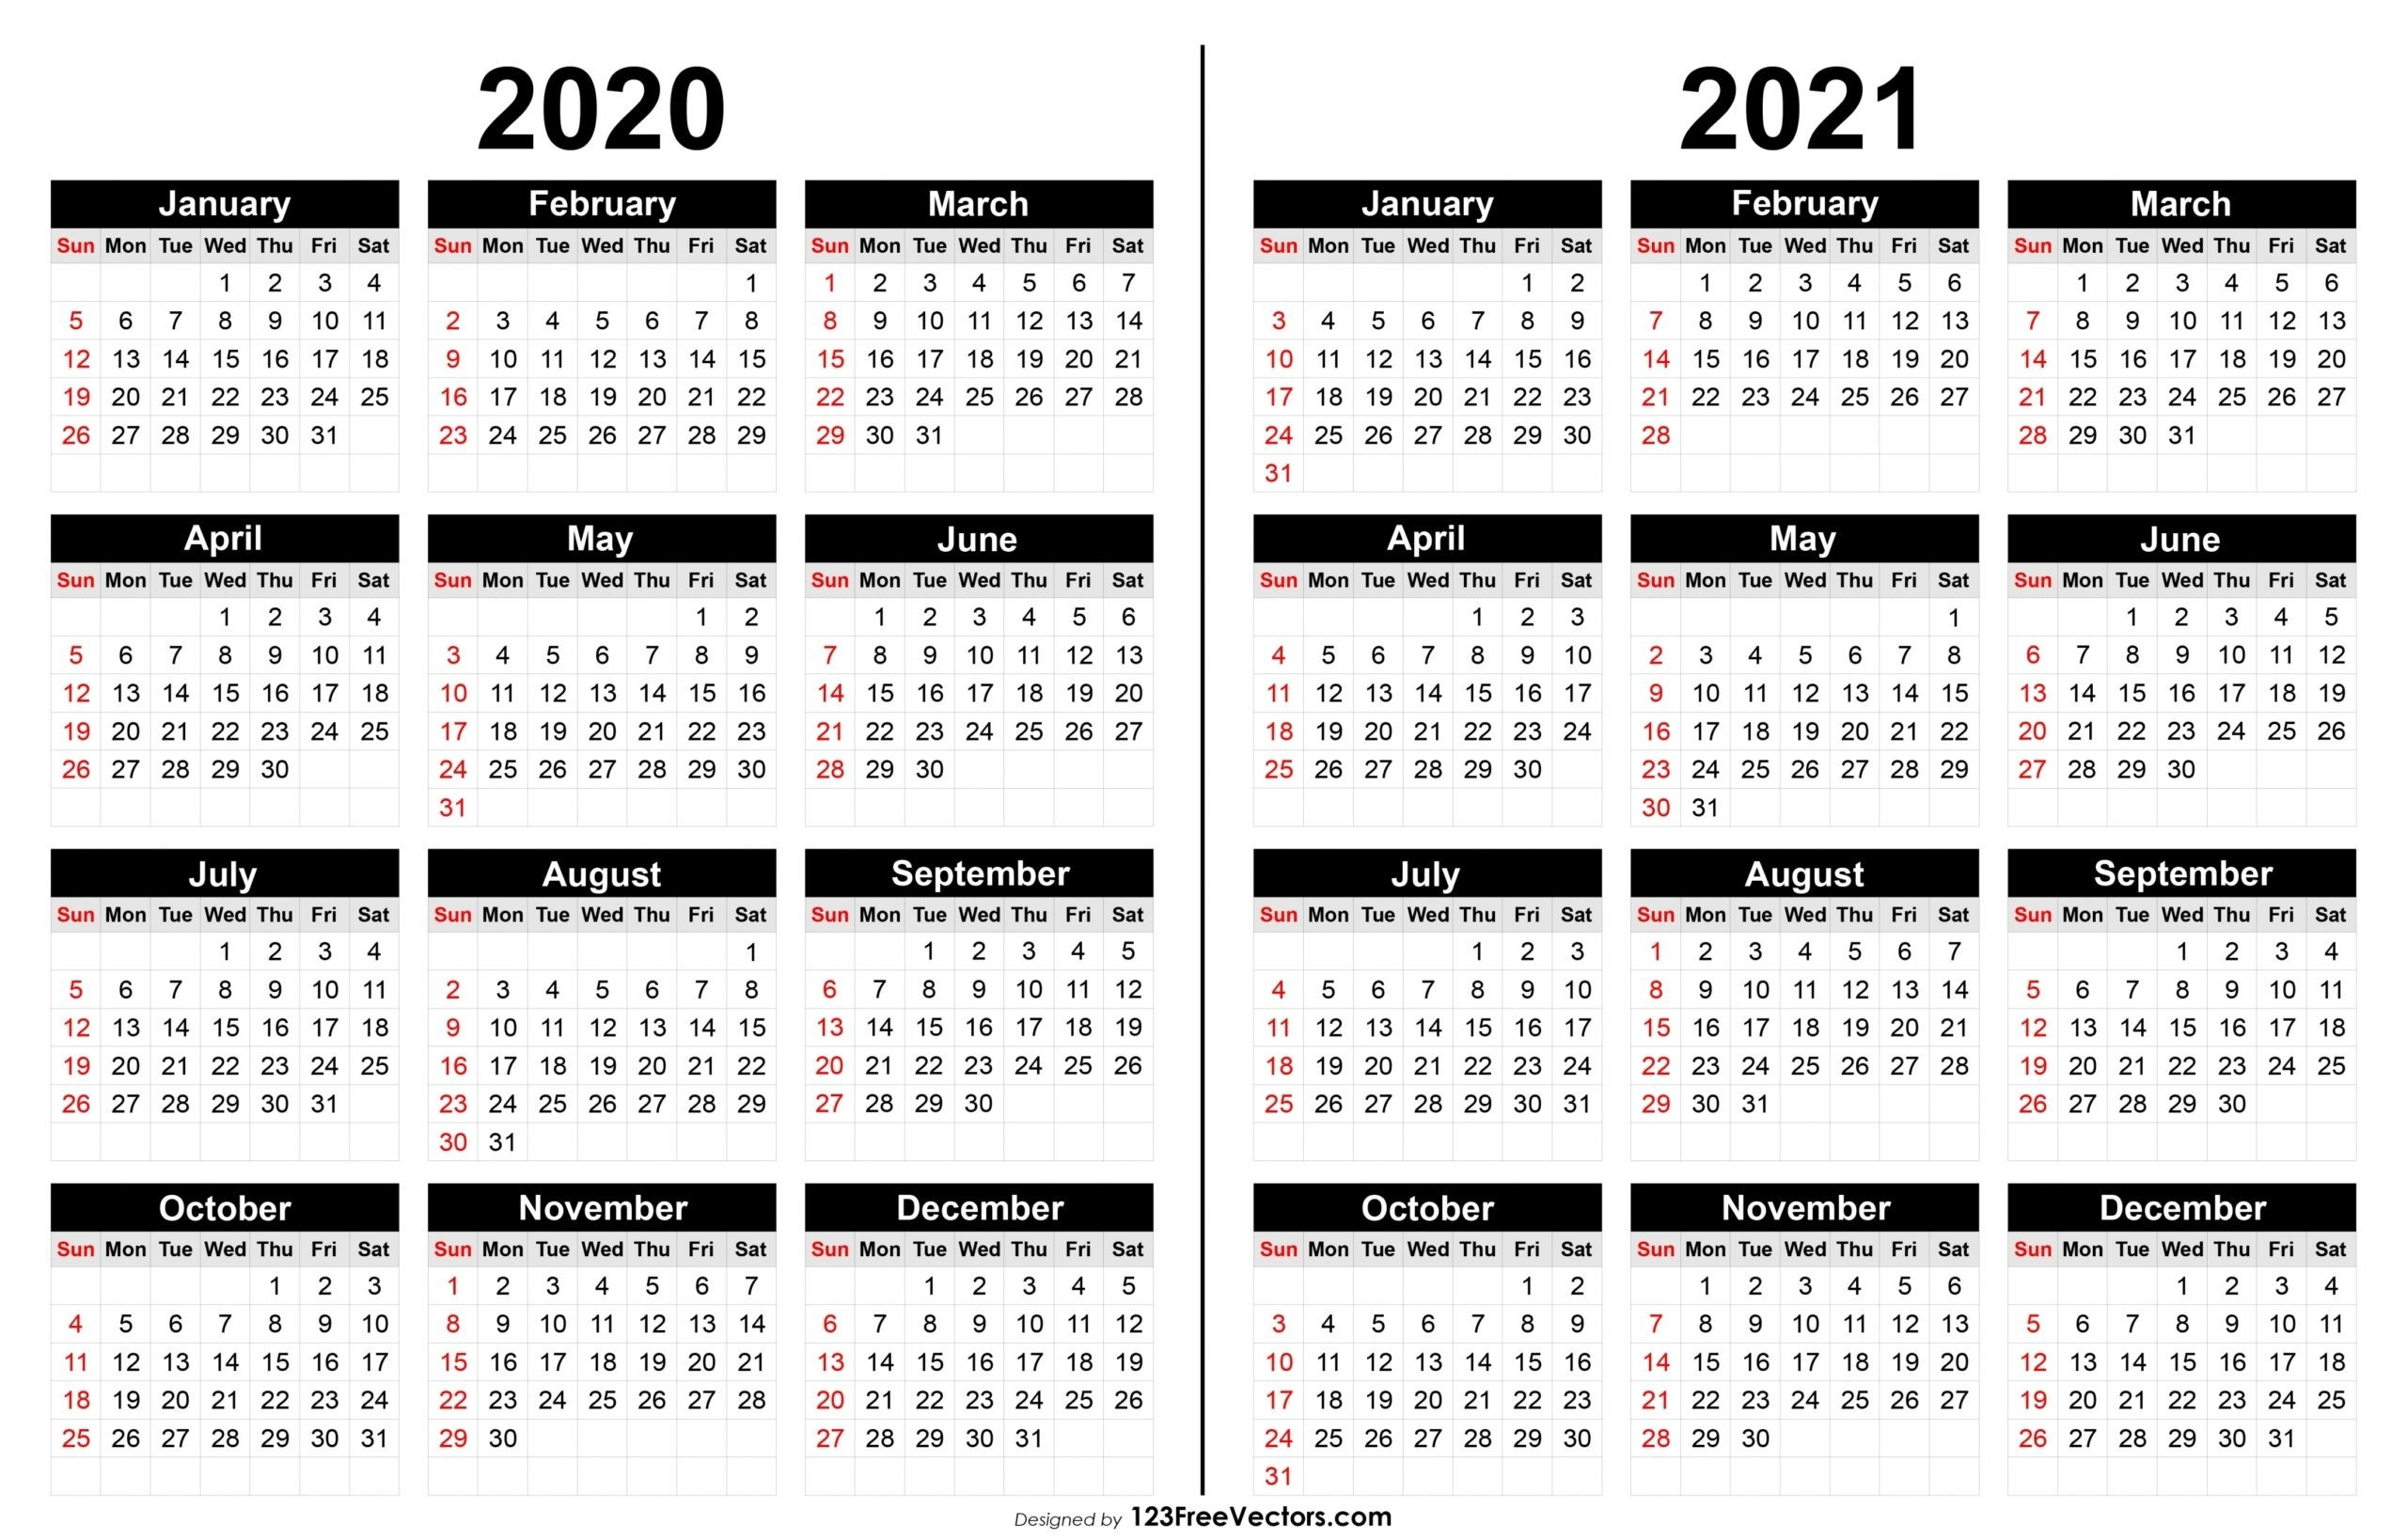 pick-print-free-calendars-without-downloading-2021-best-calendar-example